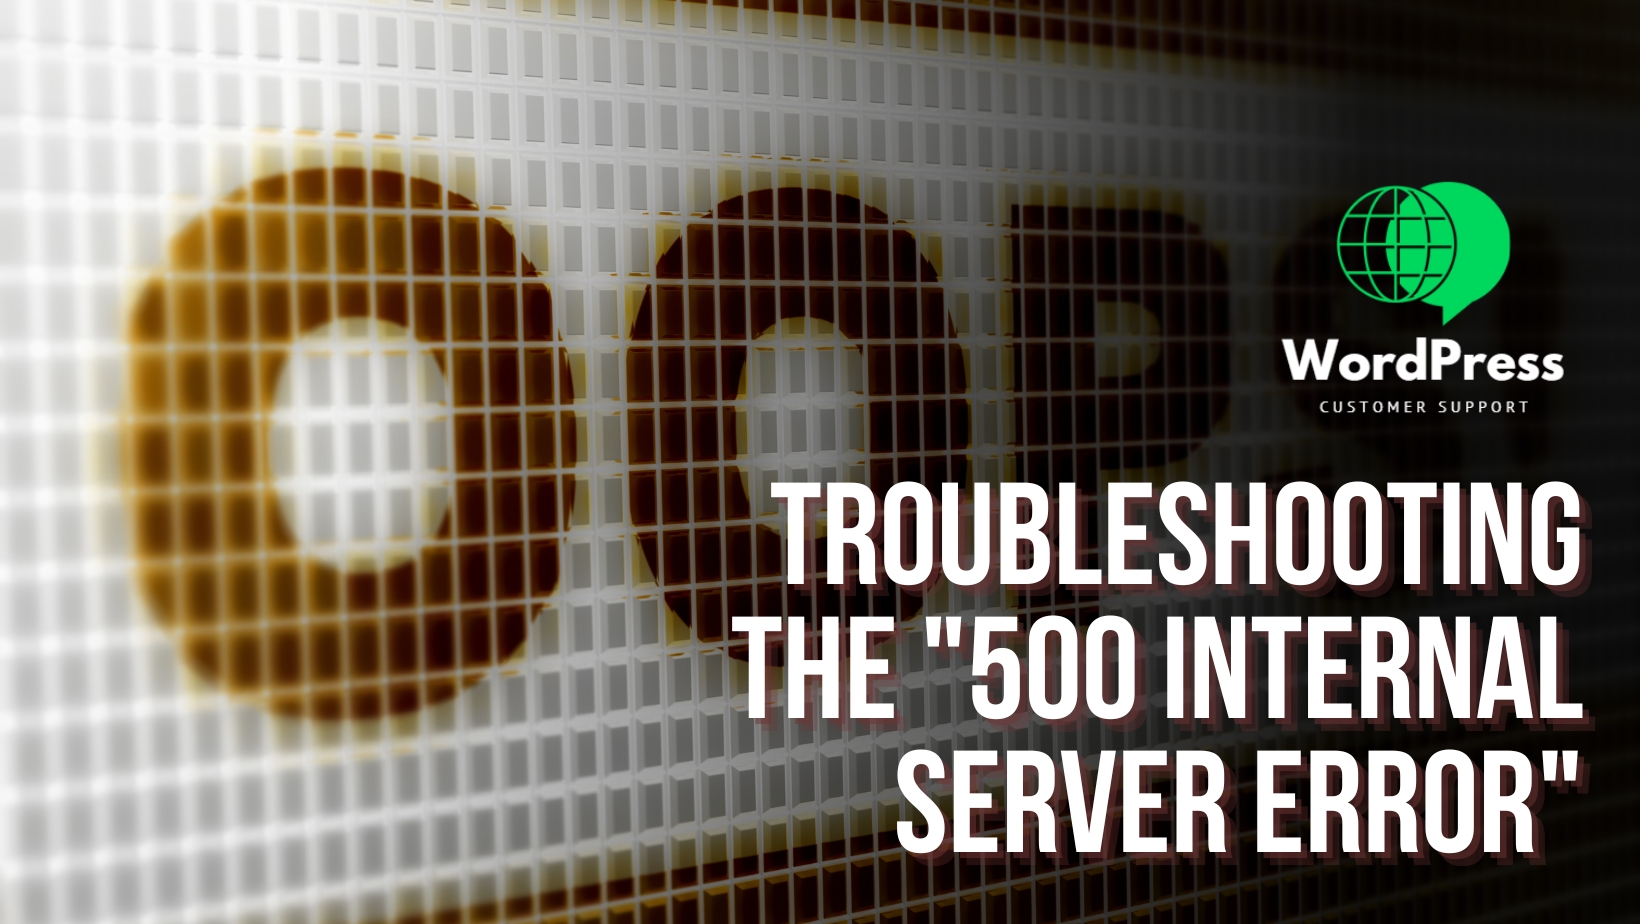 Troubleshooting the “500 Internal Server Error” – Causes and Solutions